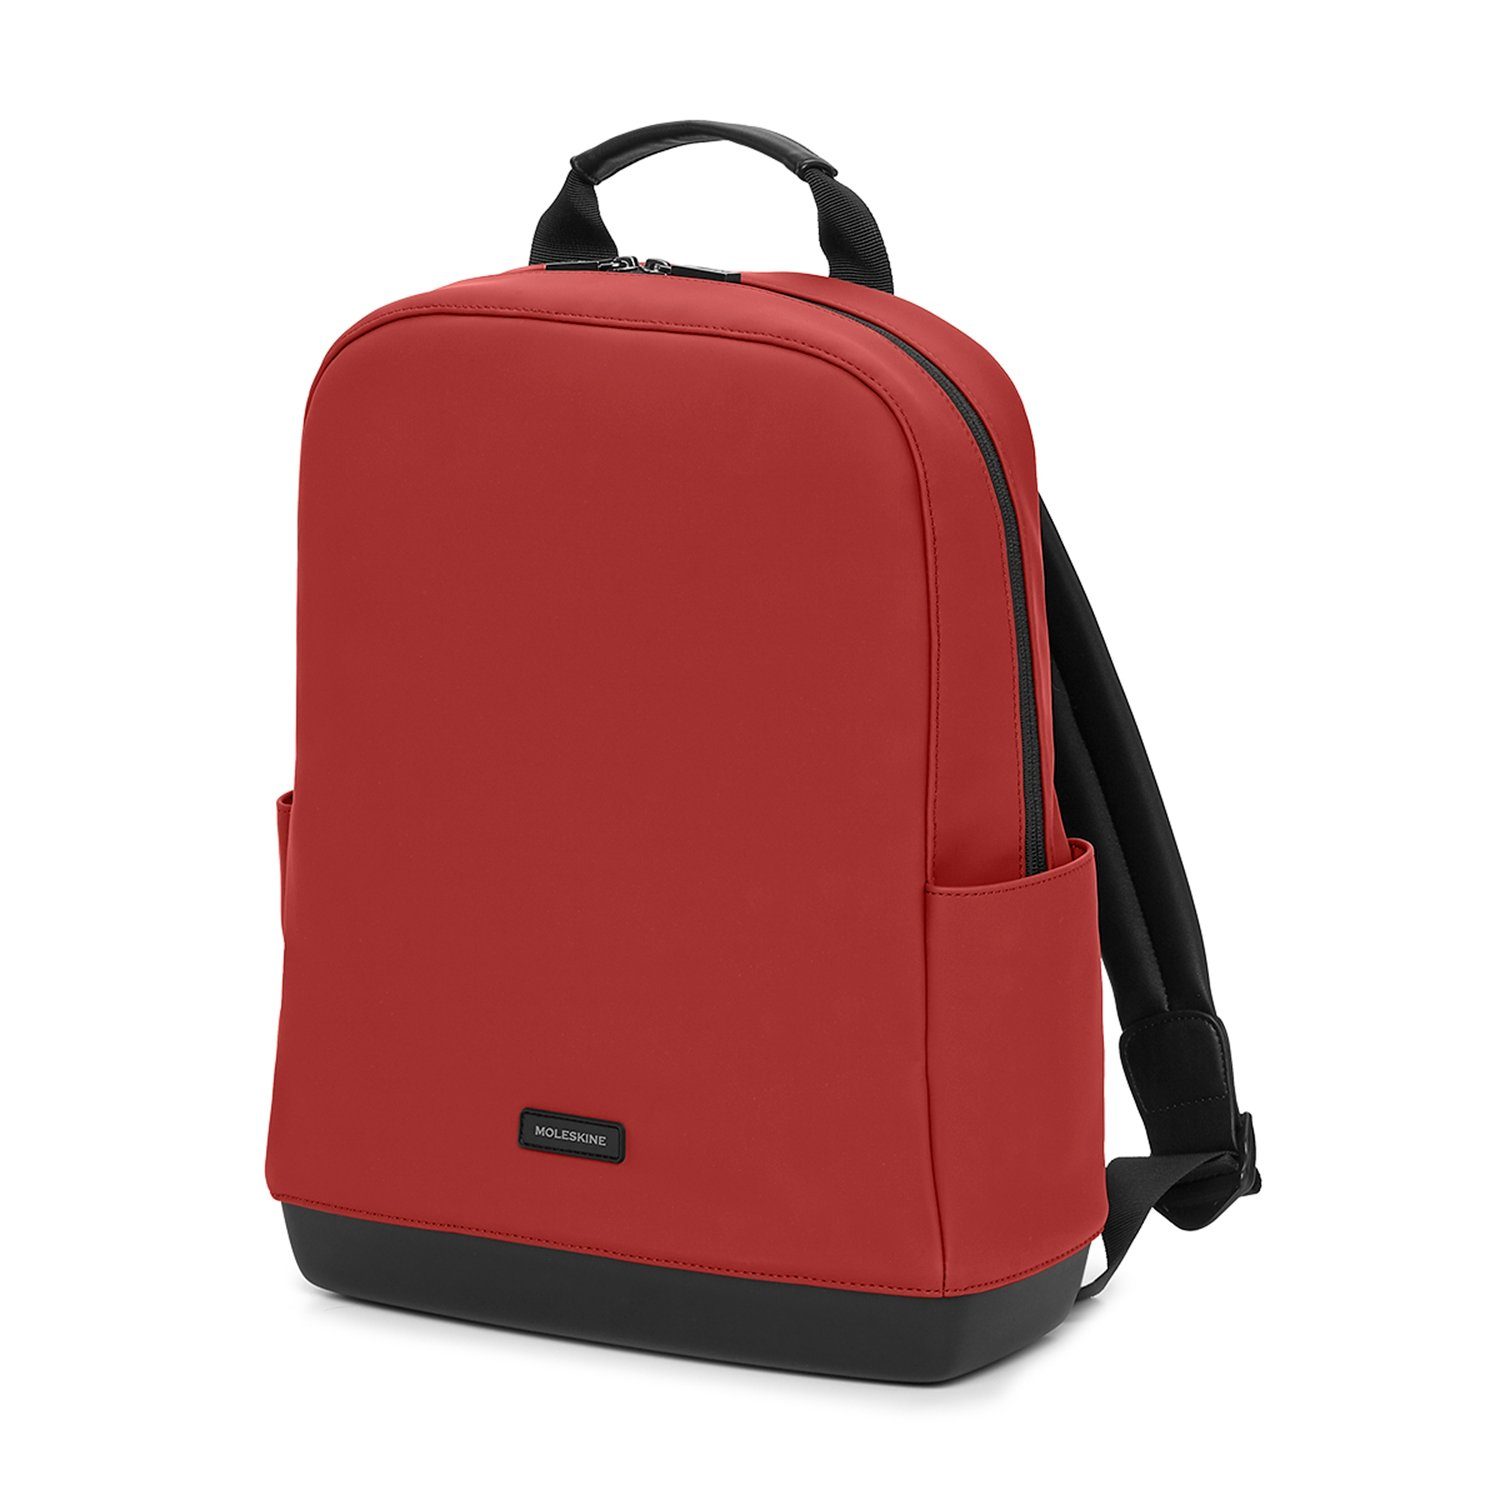 MOLESKINE Cityrucksack, The Backpack Soft Touch PU Bordeauxrot Bordeaux Red